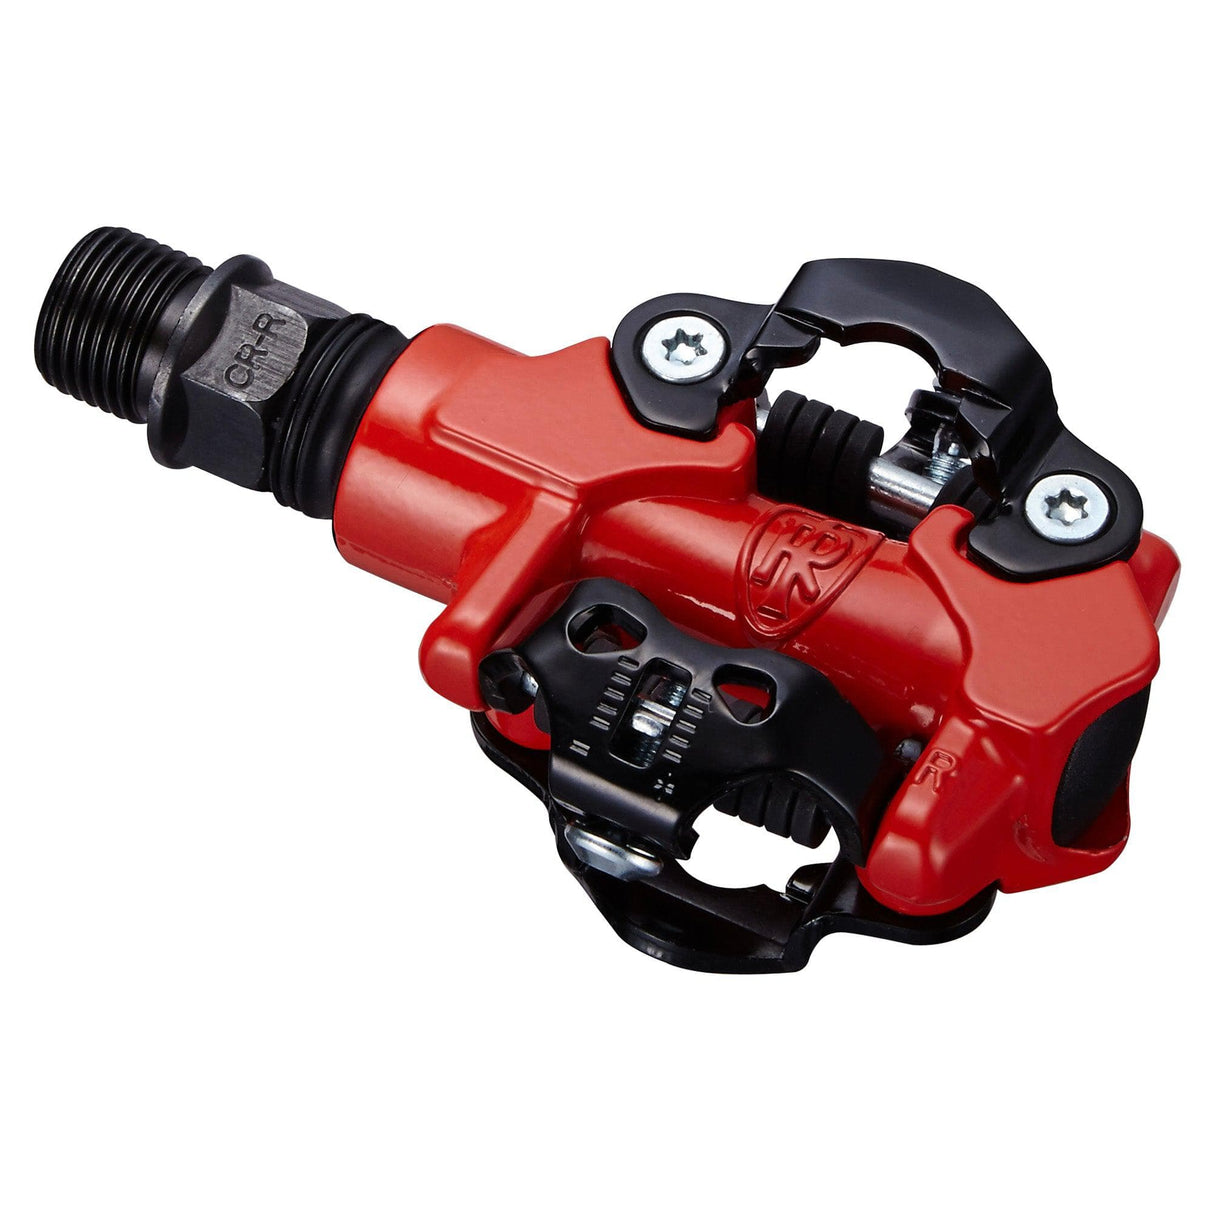 Ritchey Comp Xc Mtb Pedal: Red